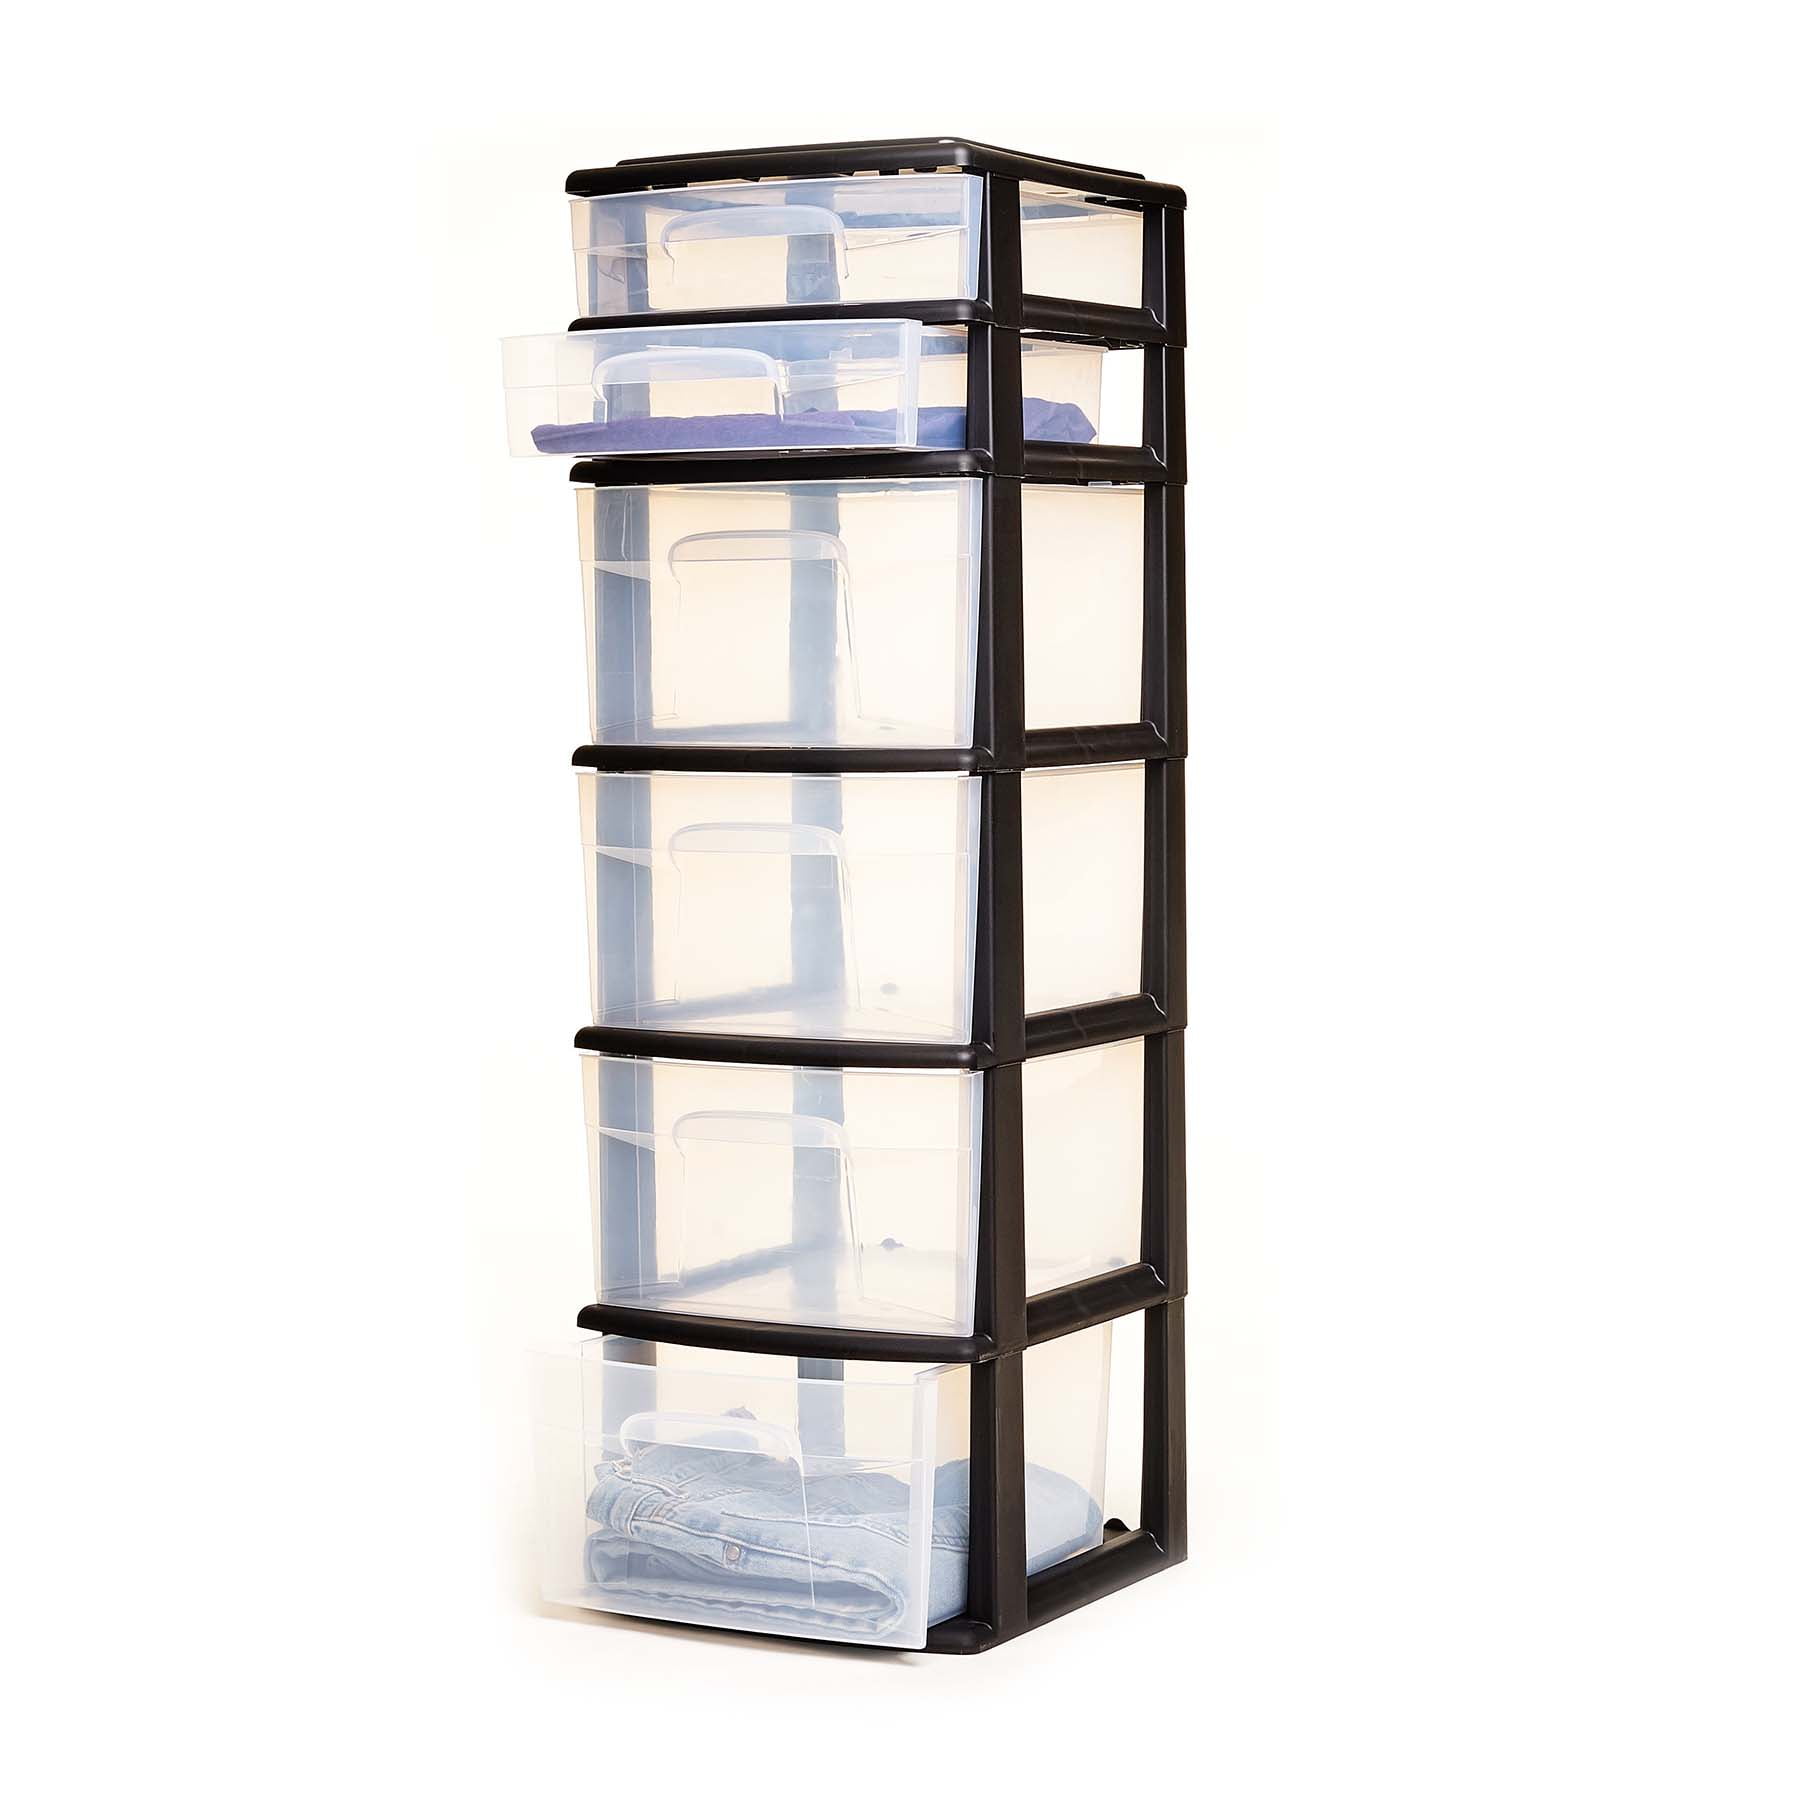 Homz® 6 Drawer Medium Tower, Black Plastic Frame with Clear Drawers, Set of 1 - 2